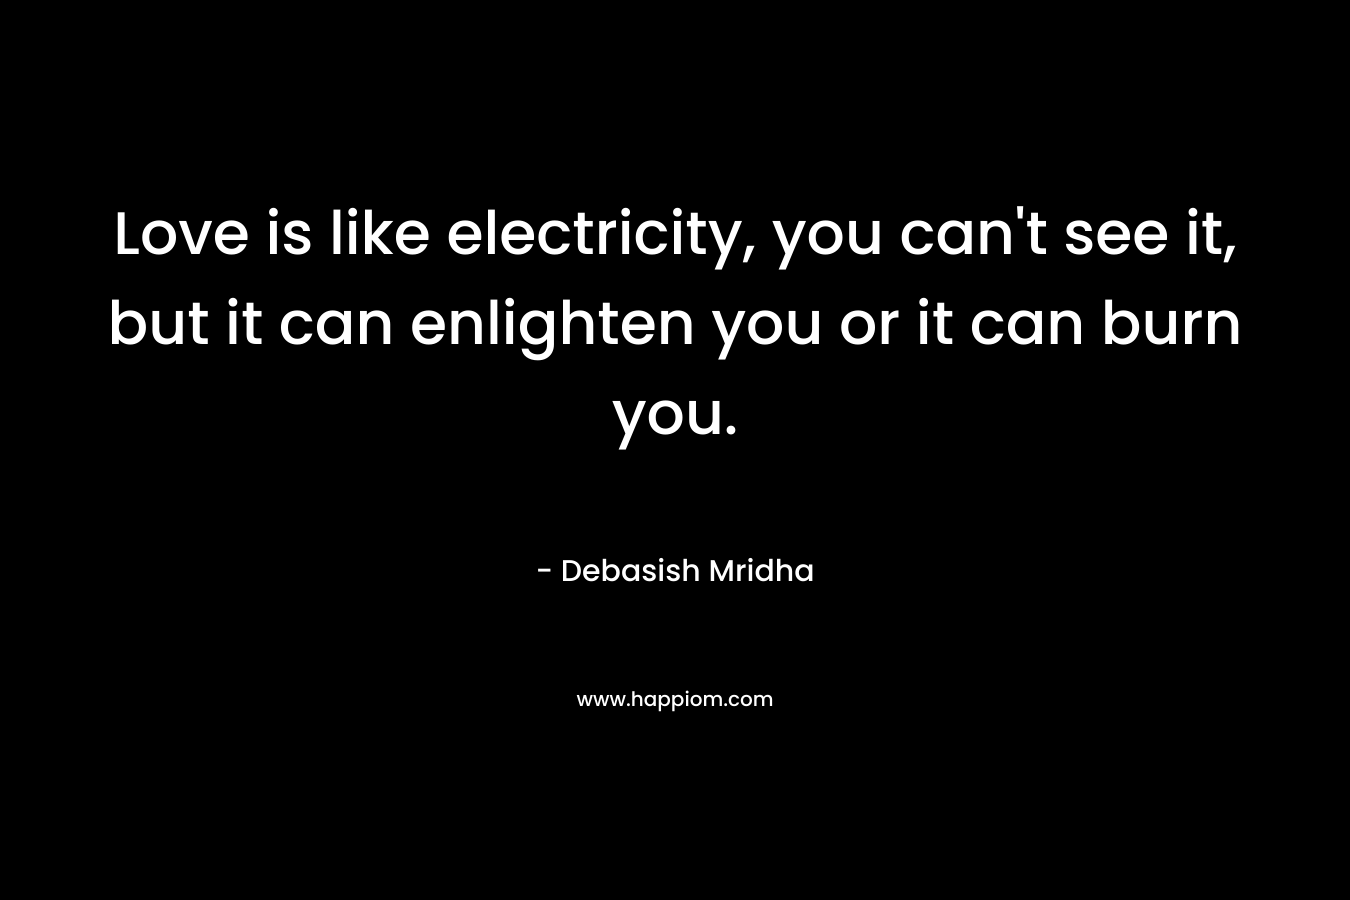 Love is like electricity, you can’t see it, but it can enlighten you or it can burn you. – Debasish Mridha